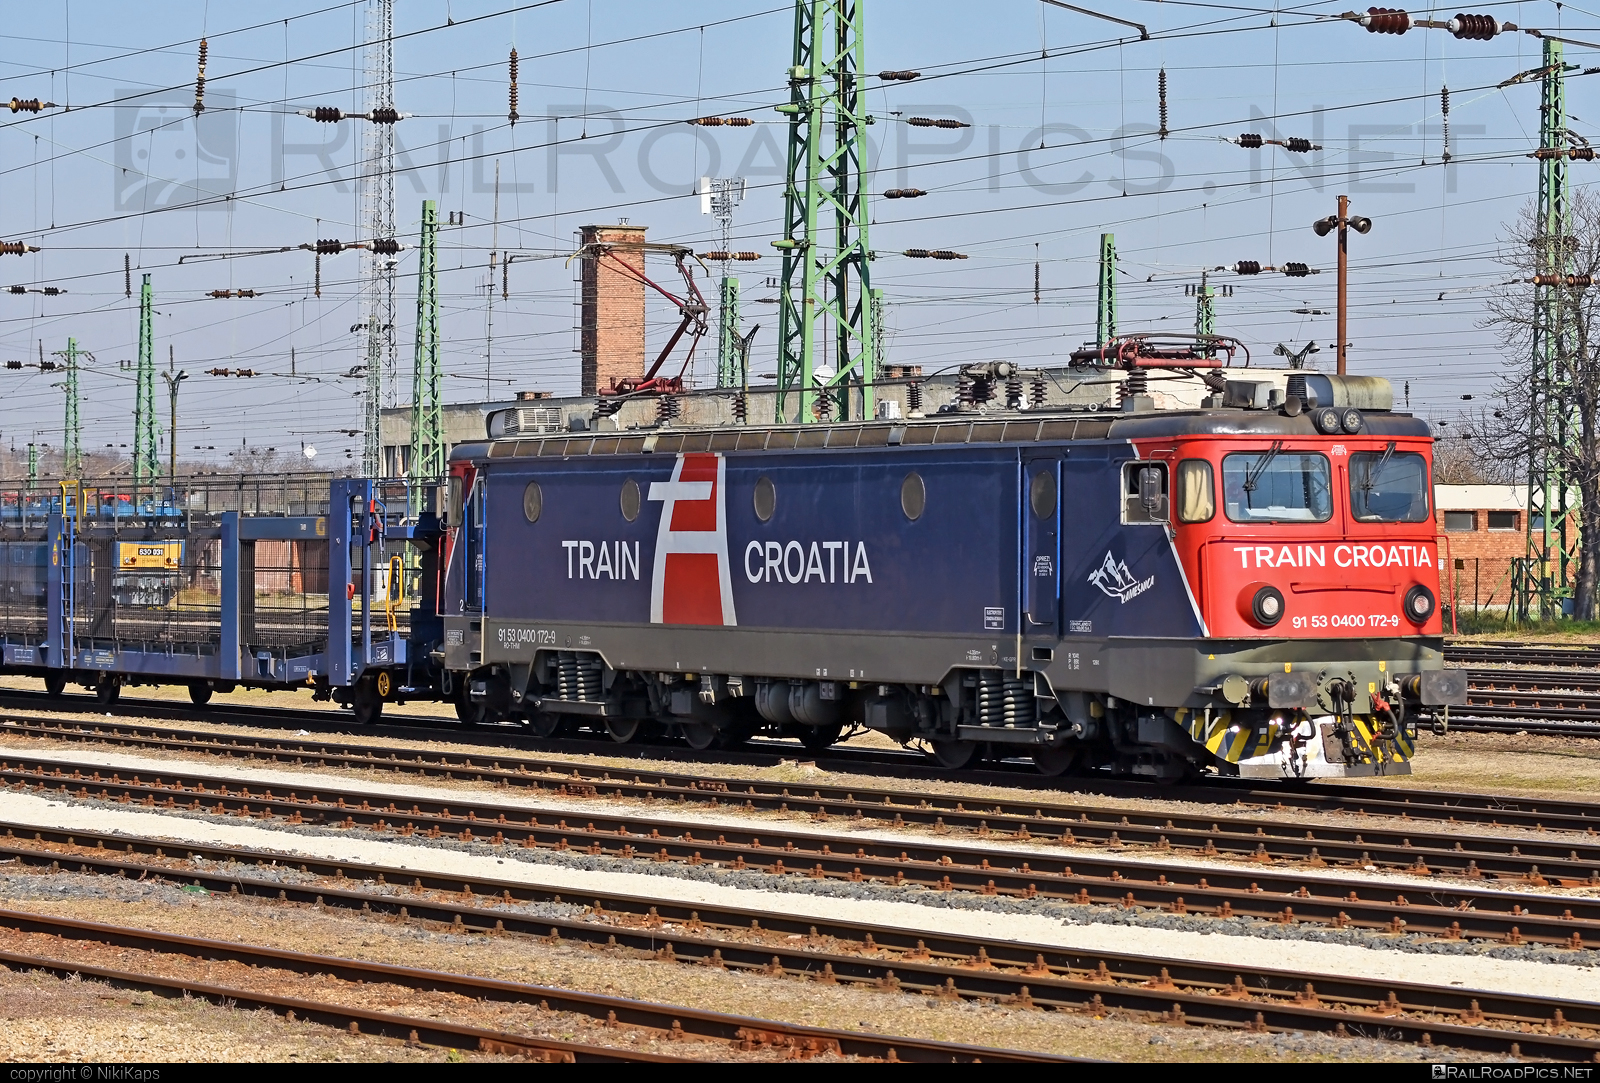 Electroputere LE 5100 - 0400 172-9 operated by Train Hungary Magánvasút Kft #TrainHungaryMaganvasut #TrainHungaryMaganvasutKft #carcarrierwagon #electroputere #electroputerecraiova #electroputerele5100 #le5100 #traincroatia